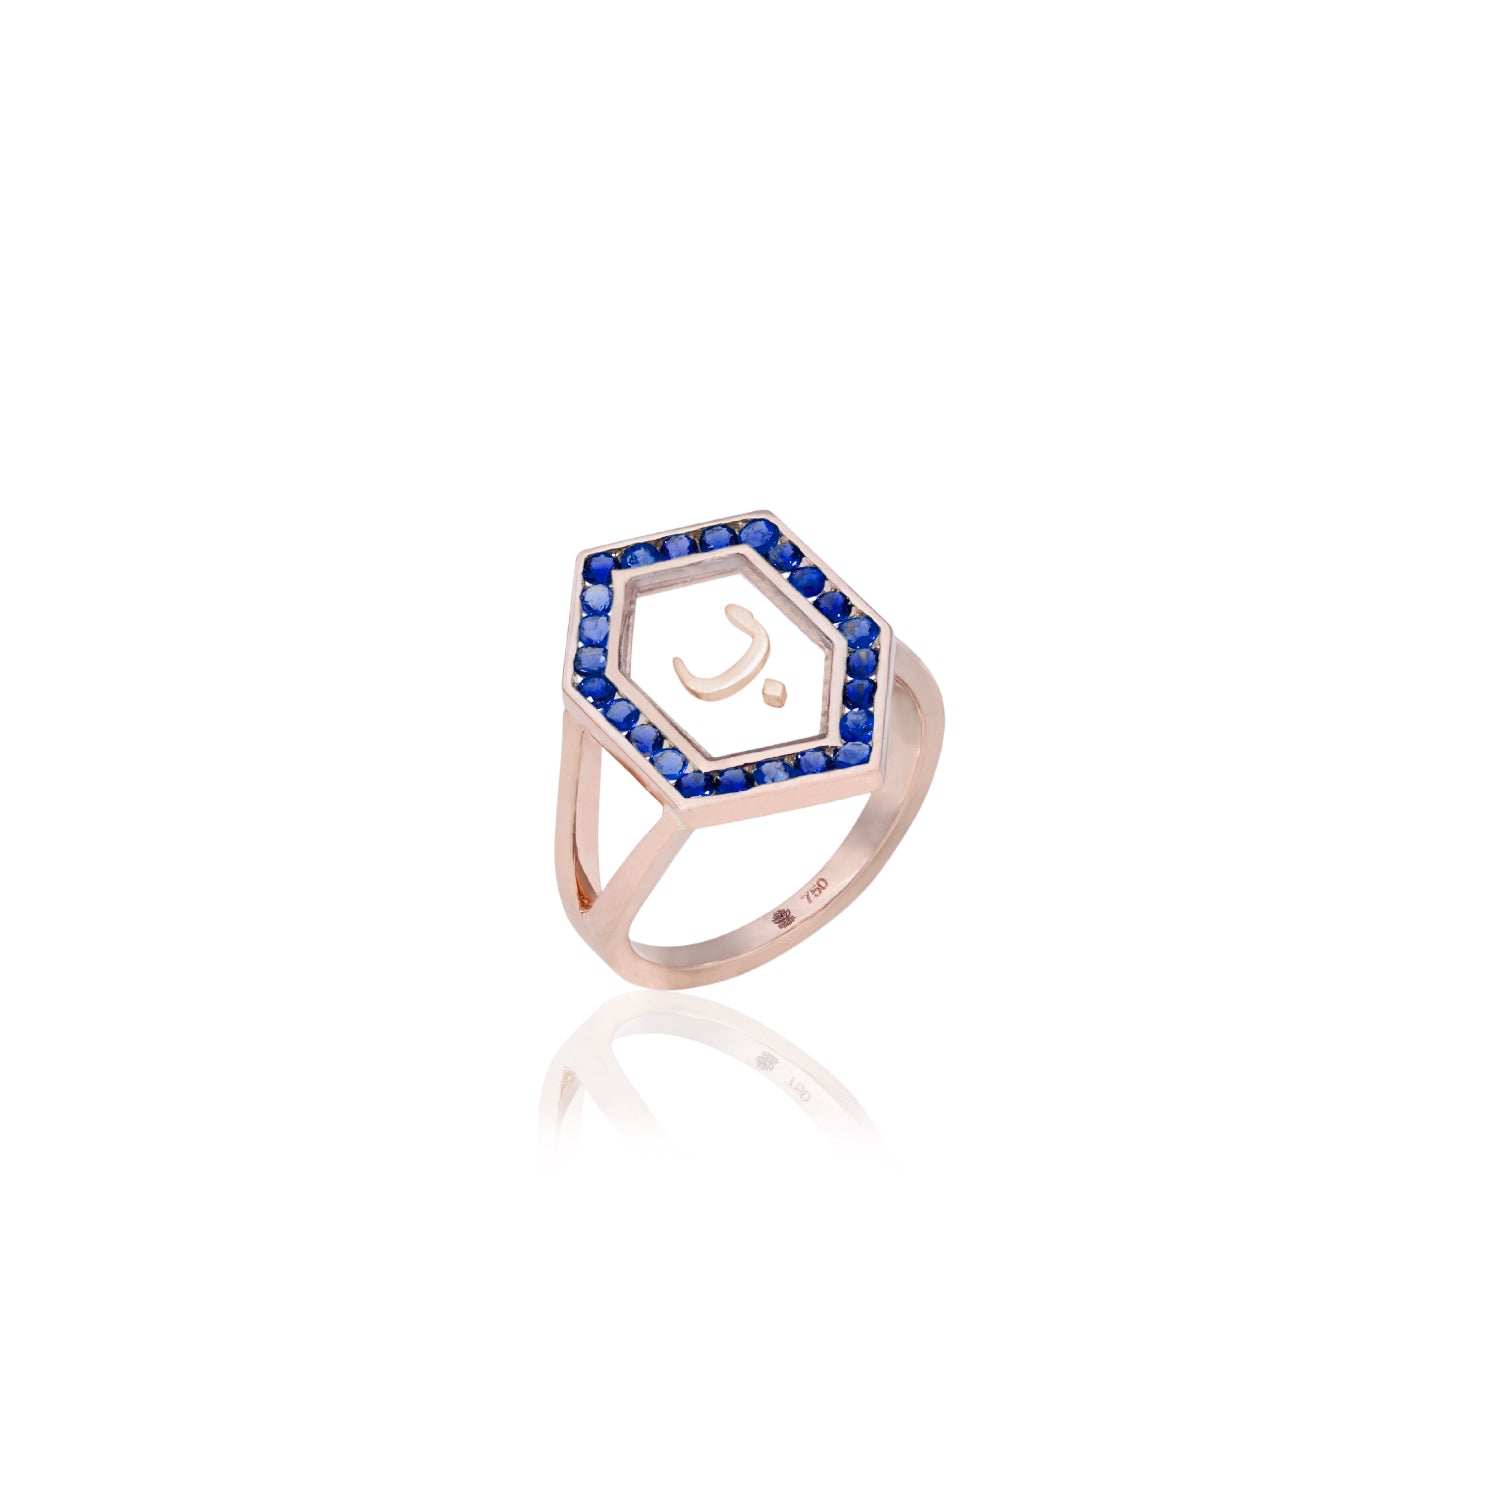 Qamoos 1.0 Letter ب Sapphire Ring in Rose Gold